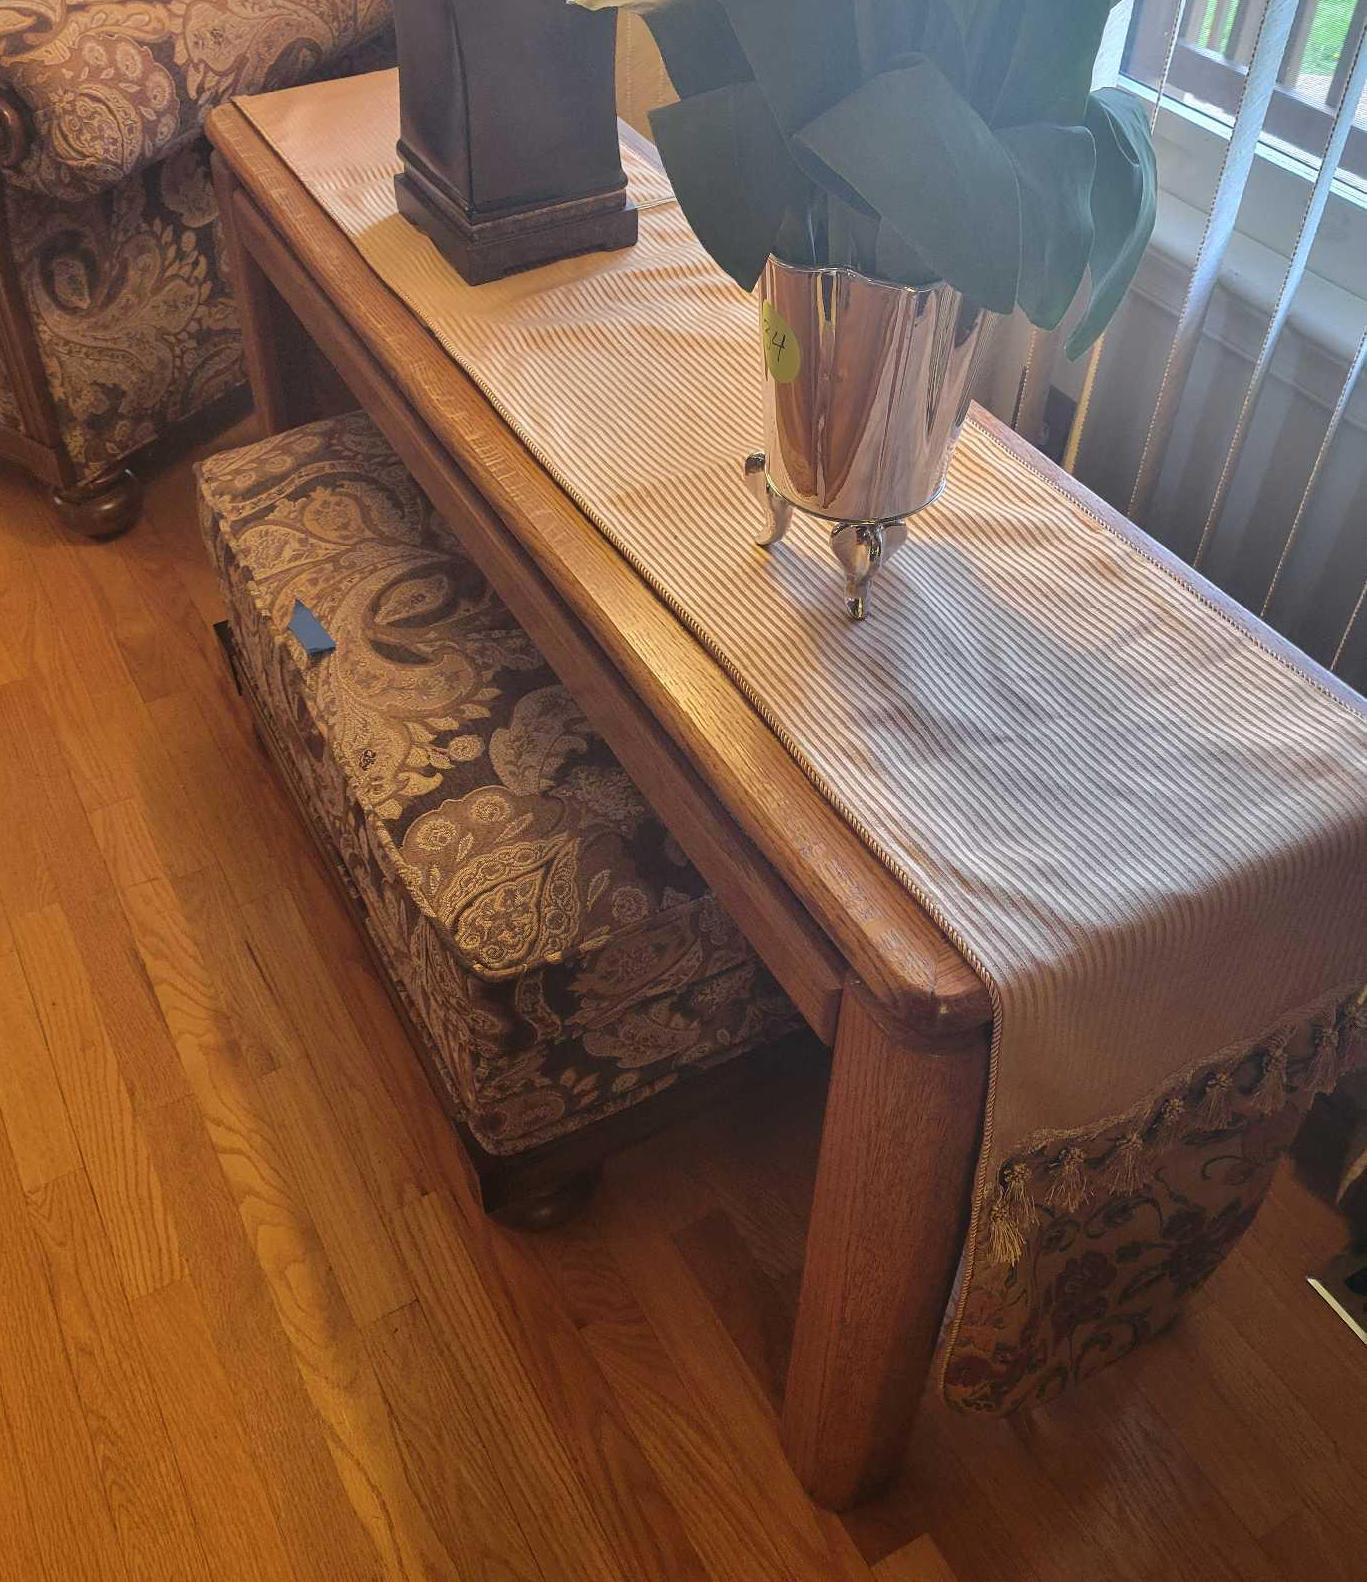 Console Table $10 STS